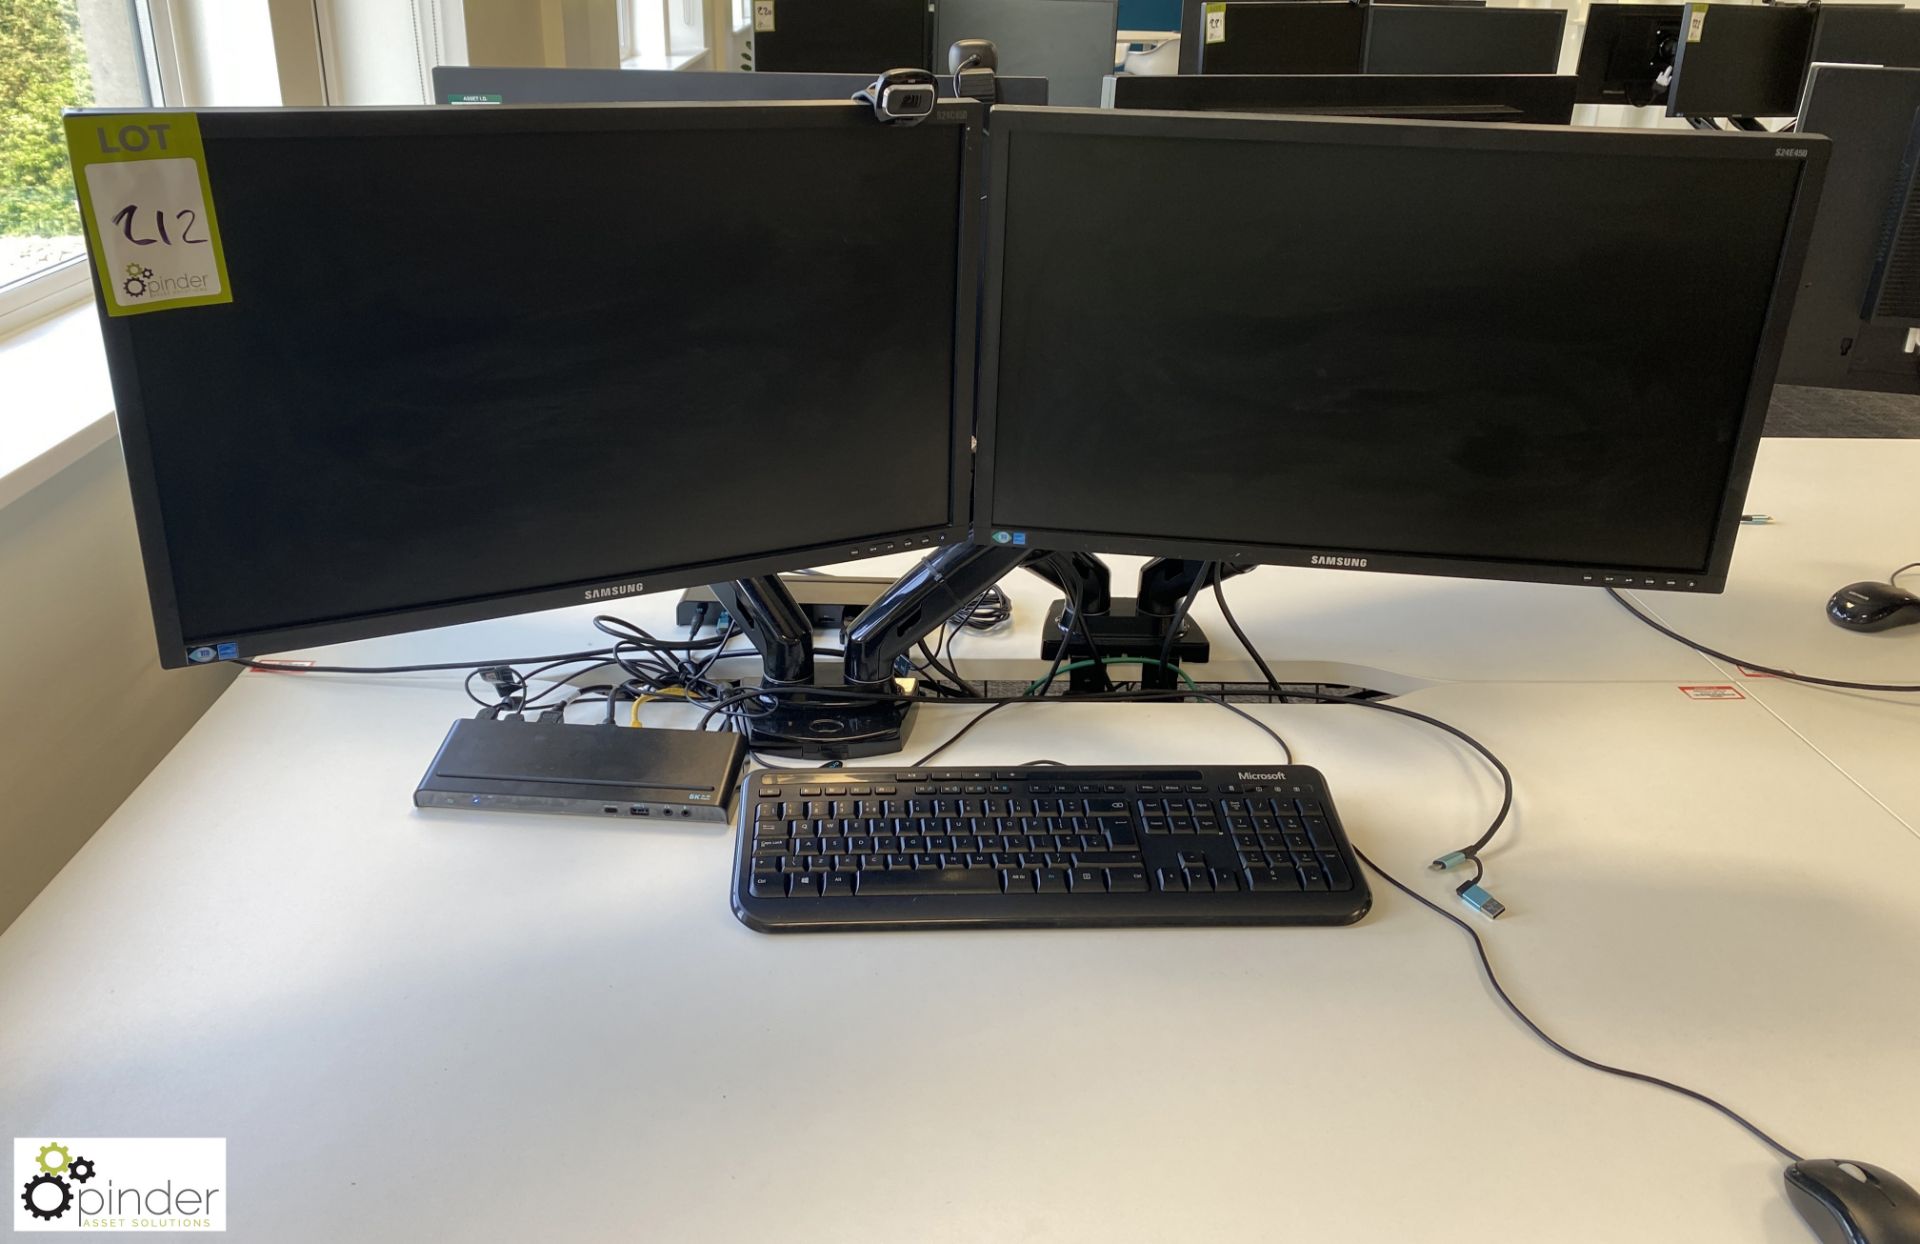 2 Samsung 24in Monitors, with iTec Triple Display docking station, webcam, keyboard and mouse (not